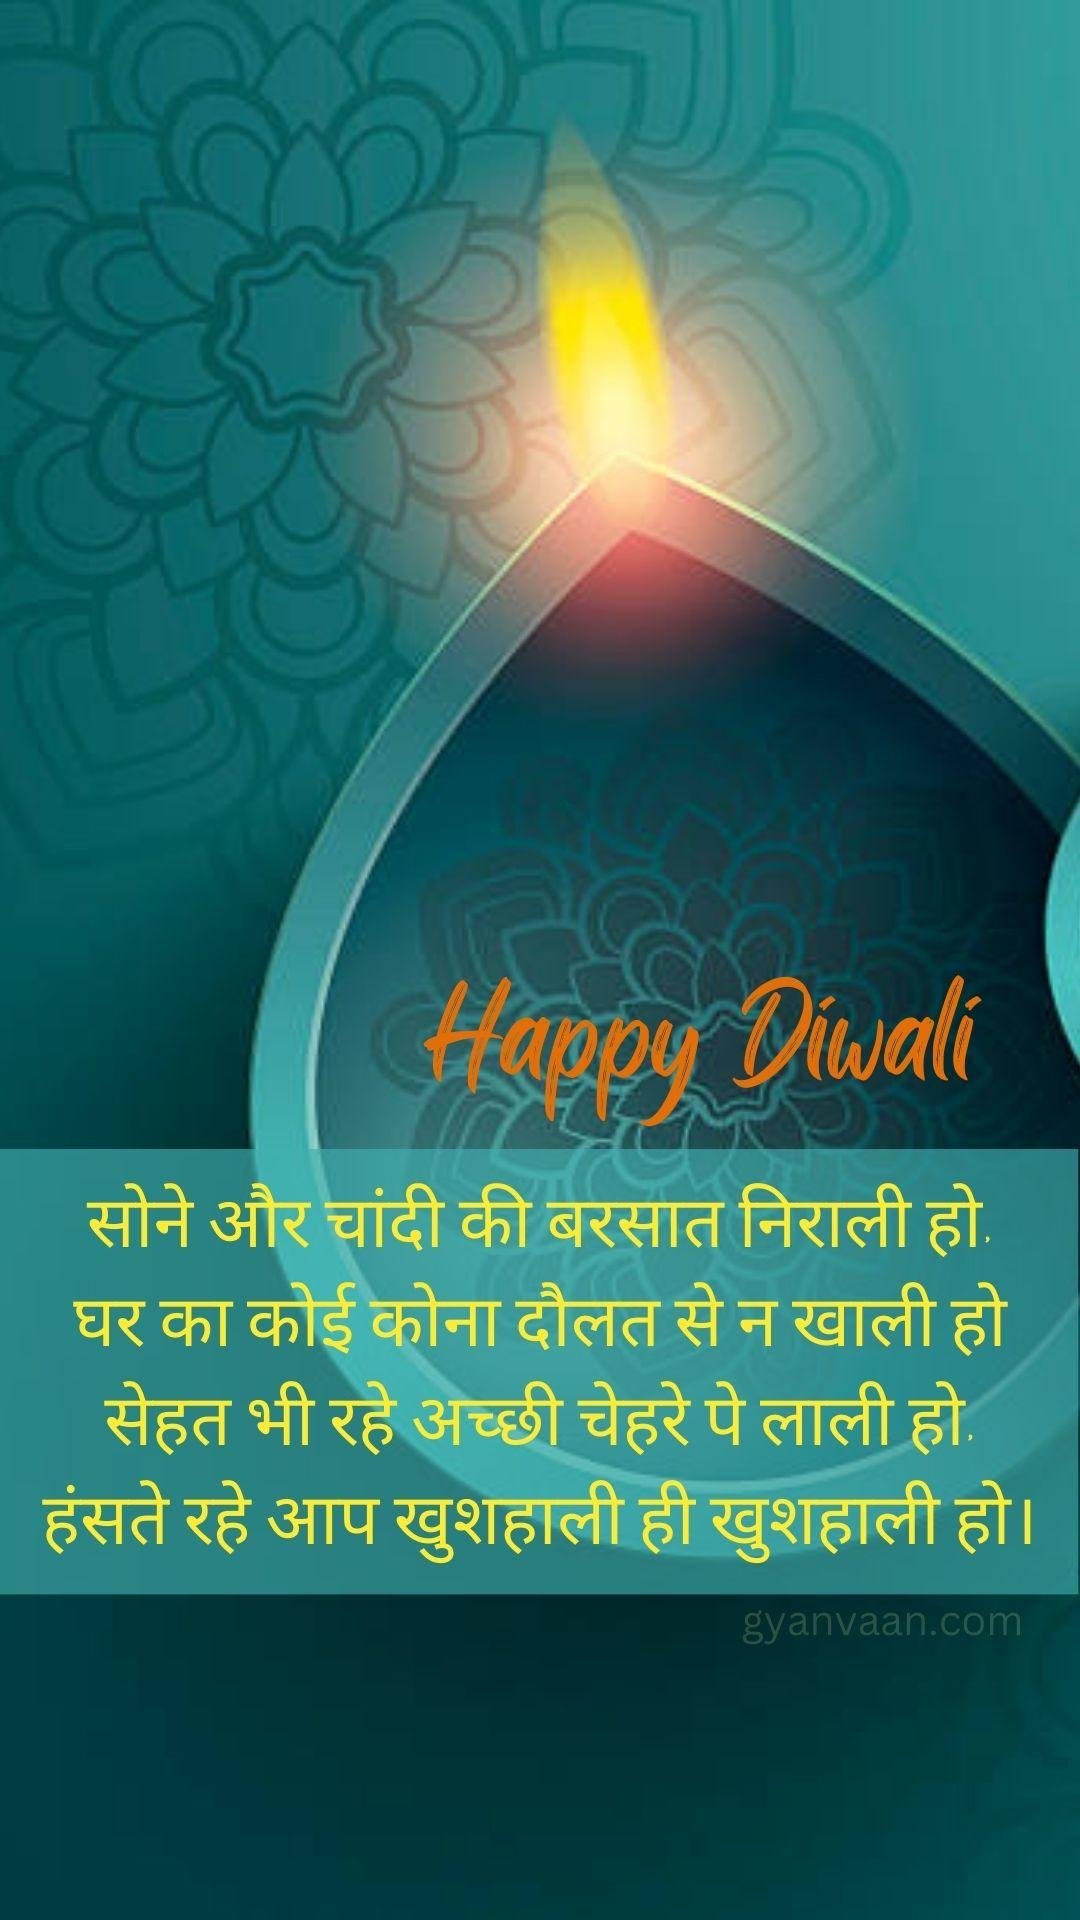 Diwali Quotes In Hindi With Wishes22 - Diwali Quotes In Hindi